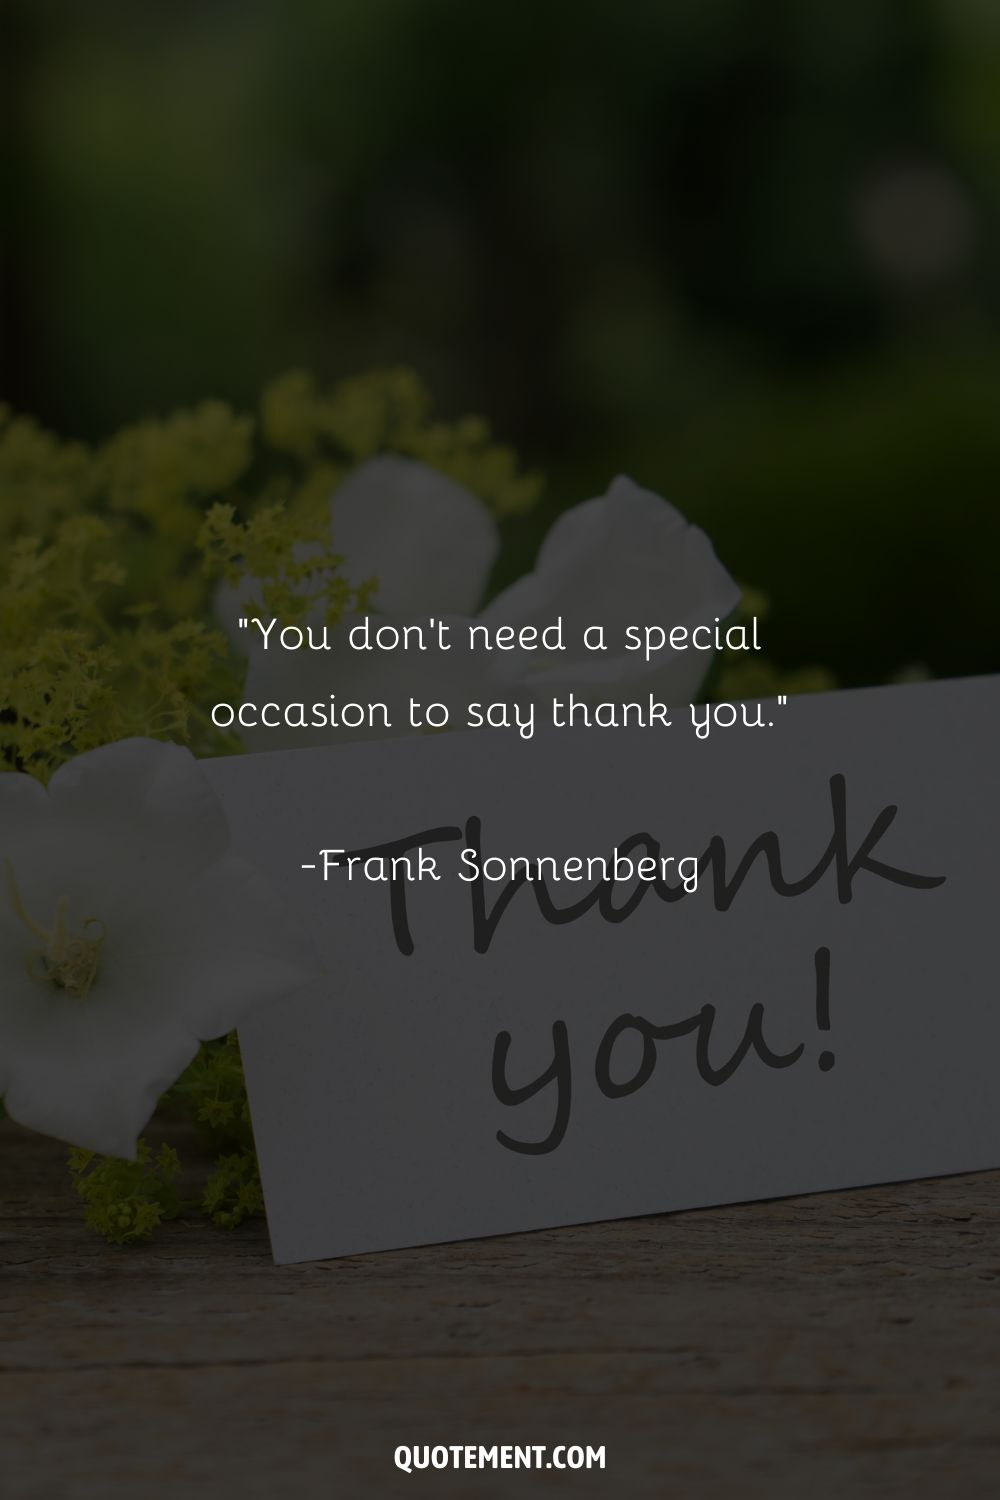 You don’t need a special occasion to say thank you.